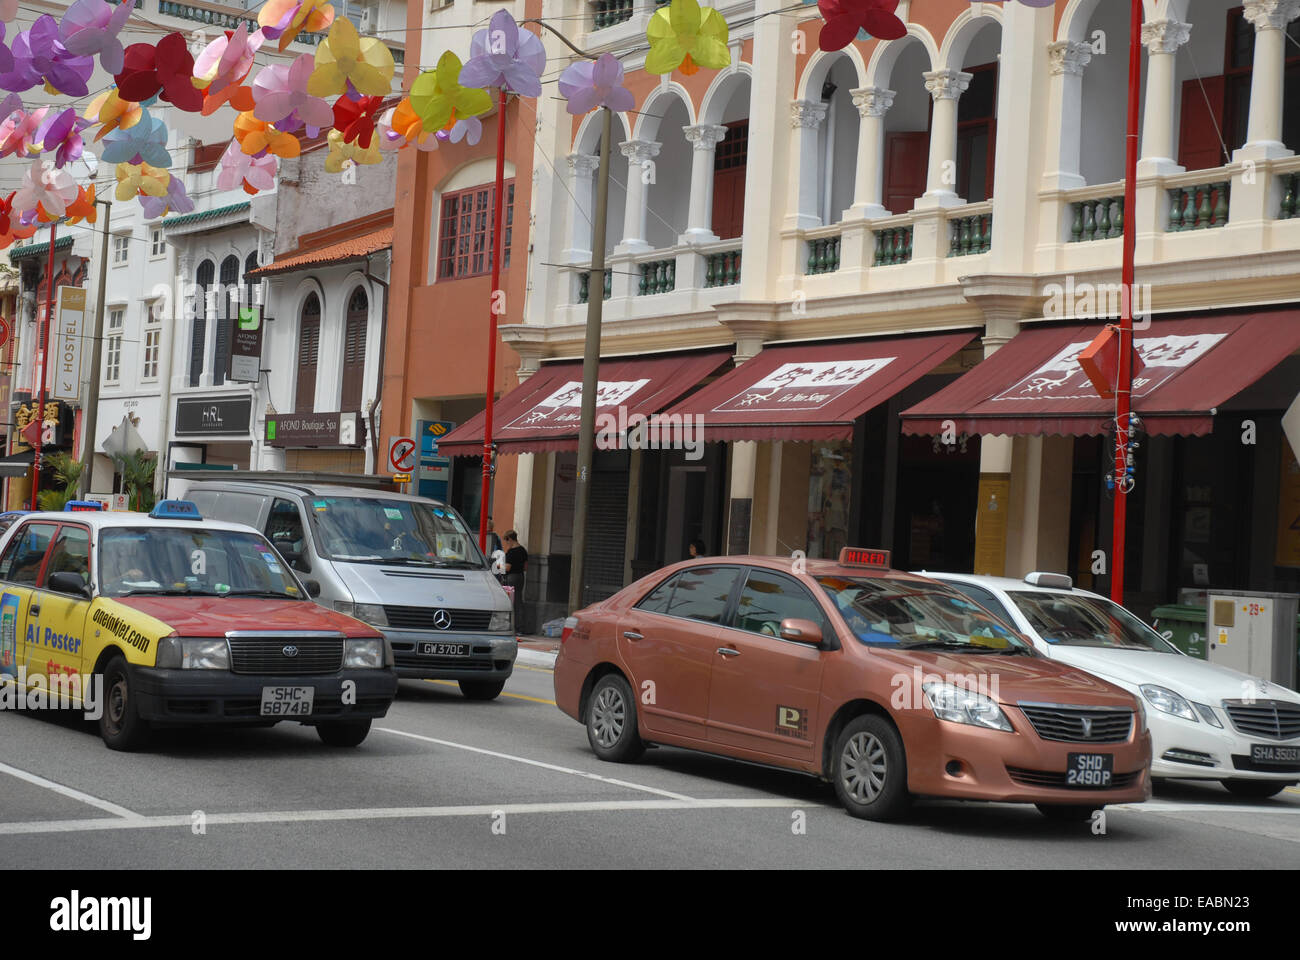 Traffic on South Bridge Road, with street decorations for Mid-Autumn Festival, Singapore Stock Photo